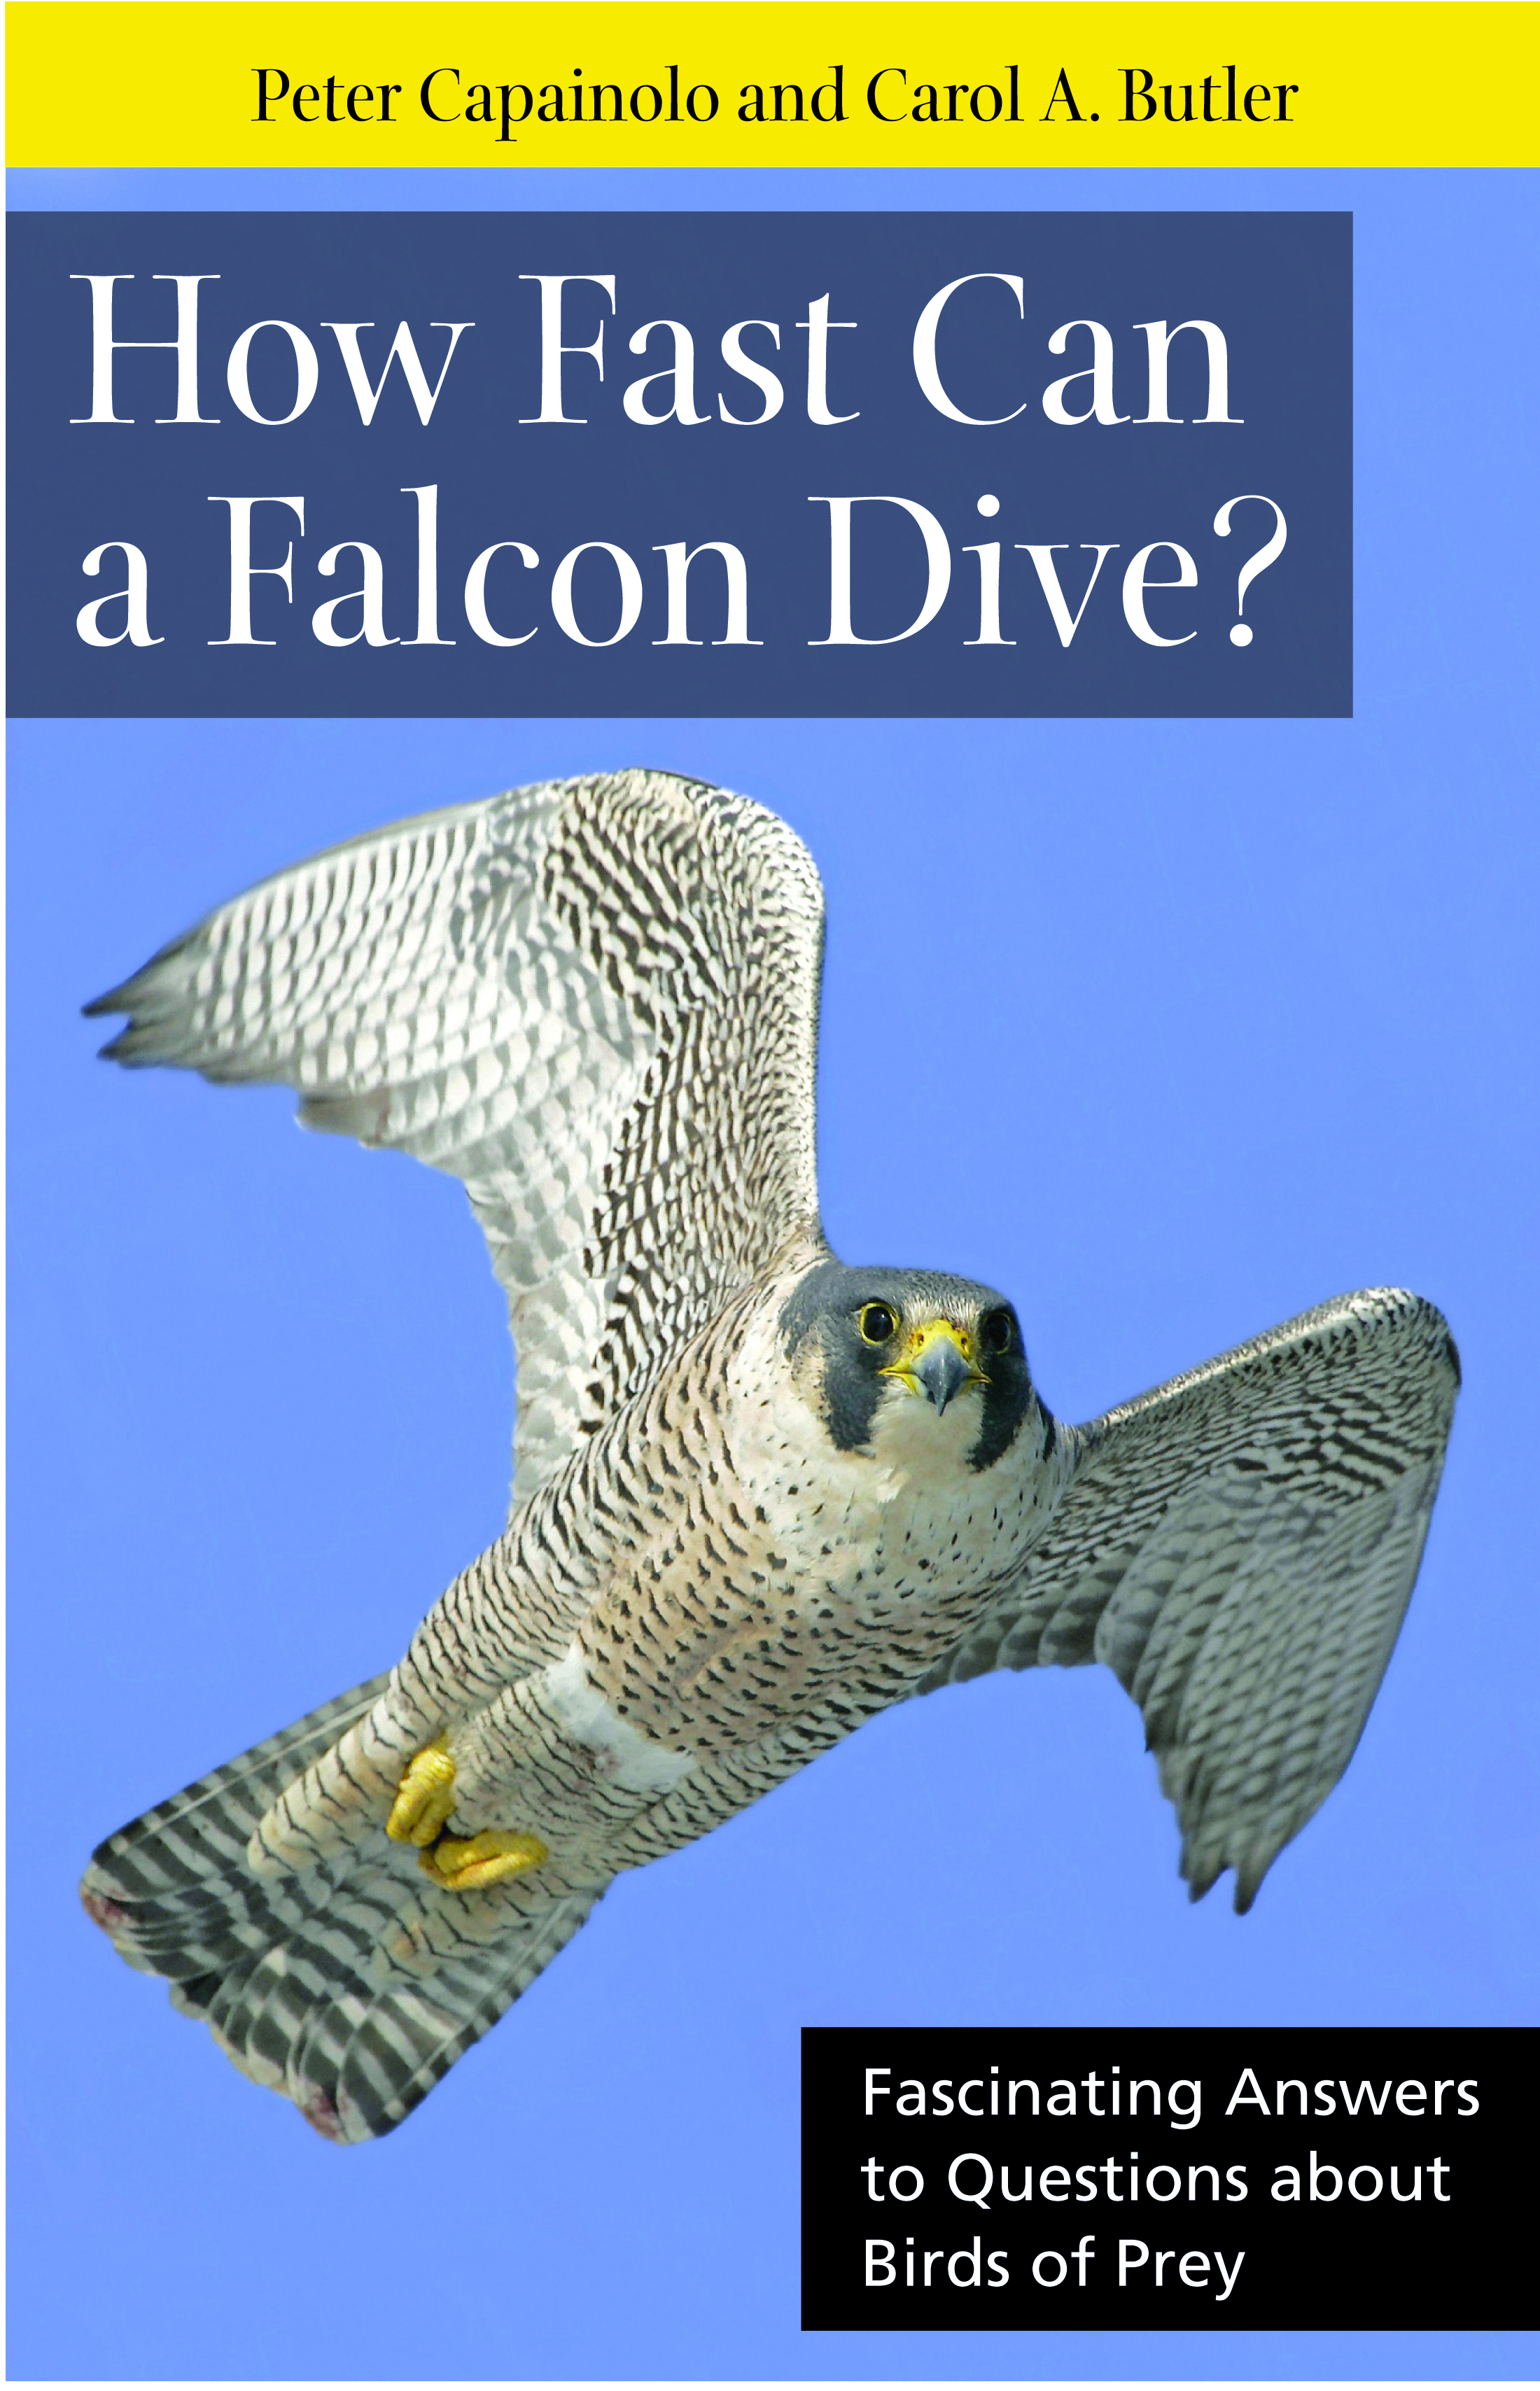 HOW FAST CAN A FALCON DIVE? (2011)